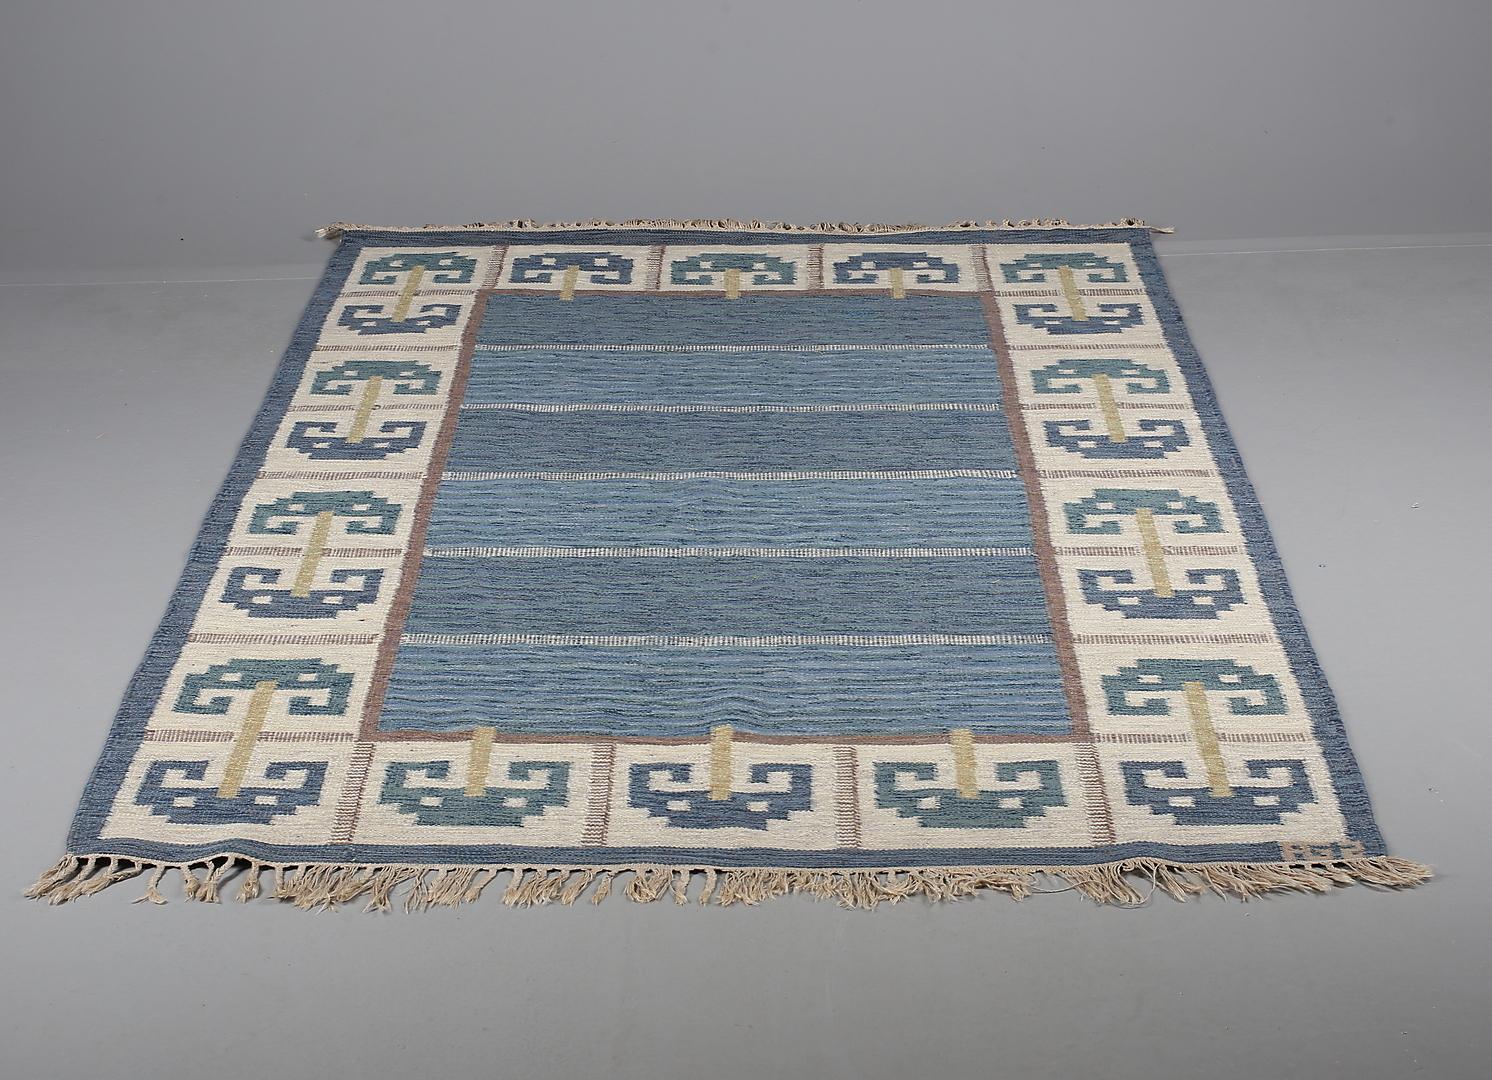 Swedish flat woven virgin wool  Rug designed by Anna-Greta Sjökvist for Svenskt Tenn. Sweden, 1950s.
This extraordinary Kilin Technique rug features a geometric pattern of crab-like shapes, a motif easily recognizable from the designer style, the